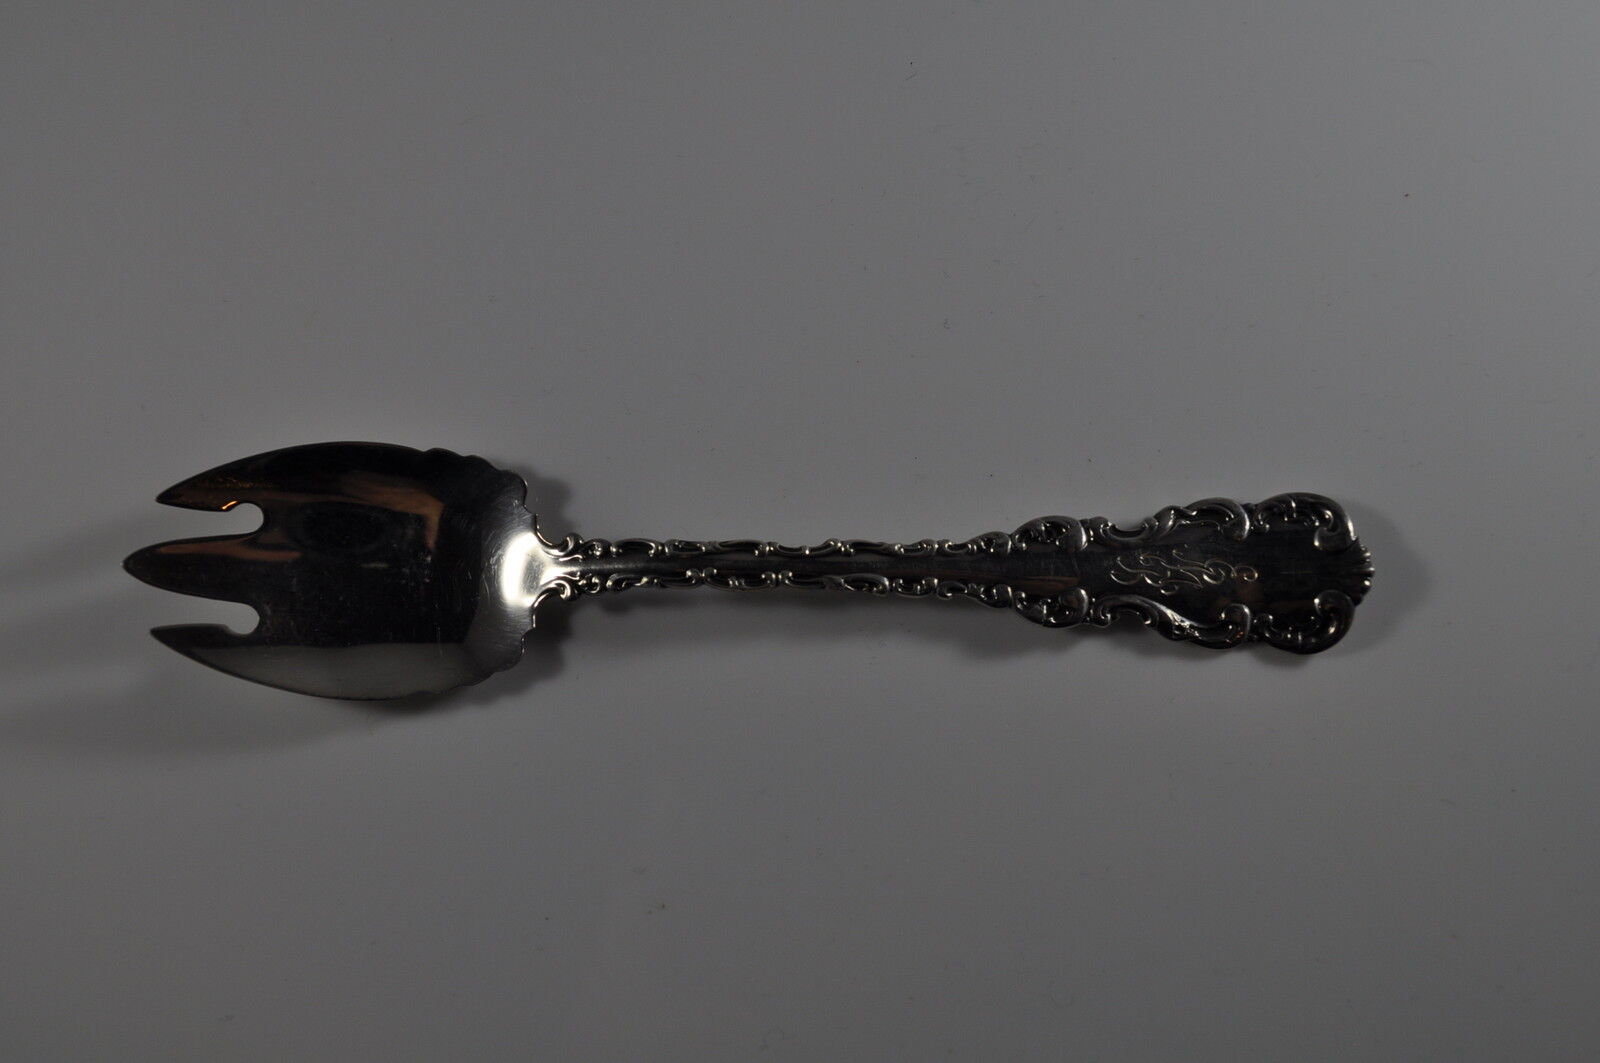 Sterling Silver Ice Cream Spoon - Louis XV by Whiting Monogrammed